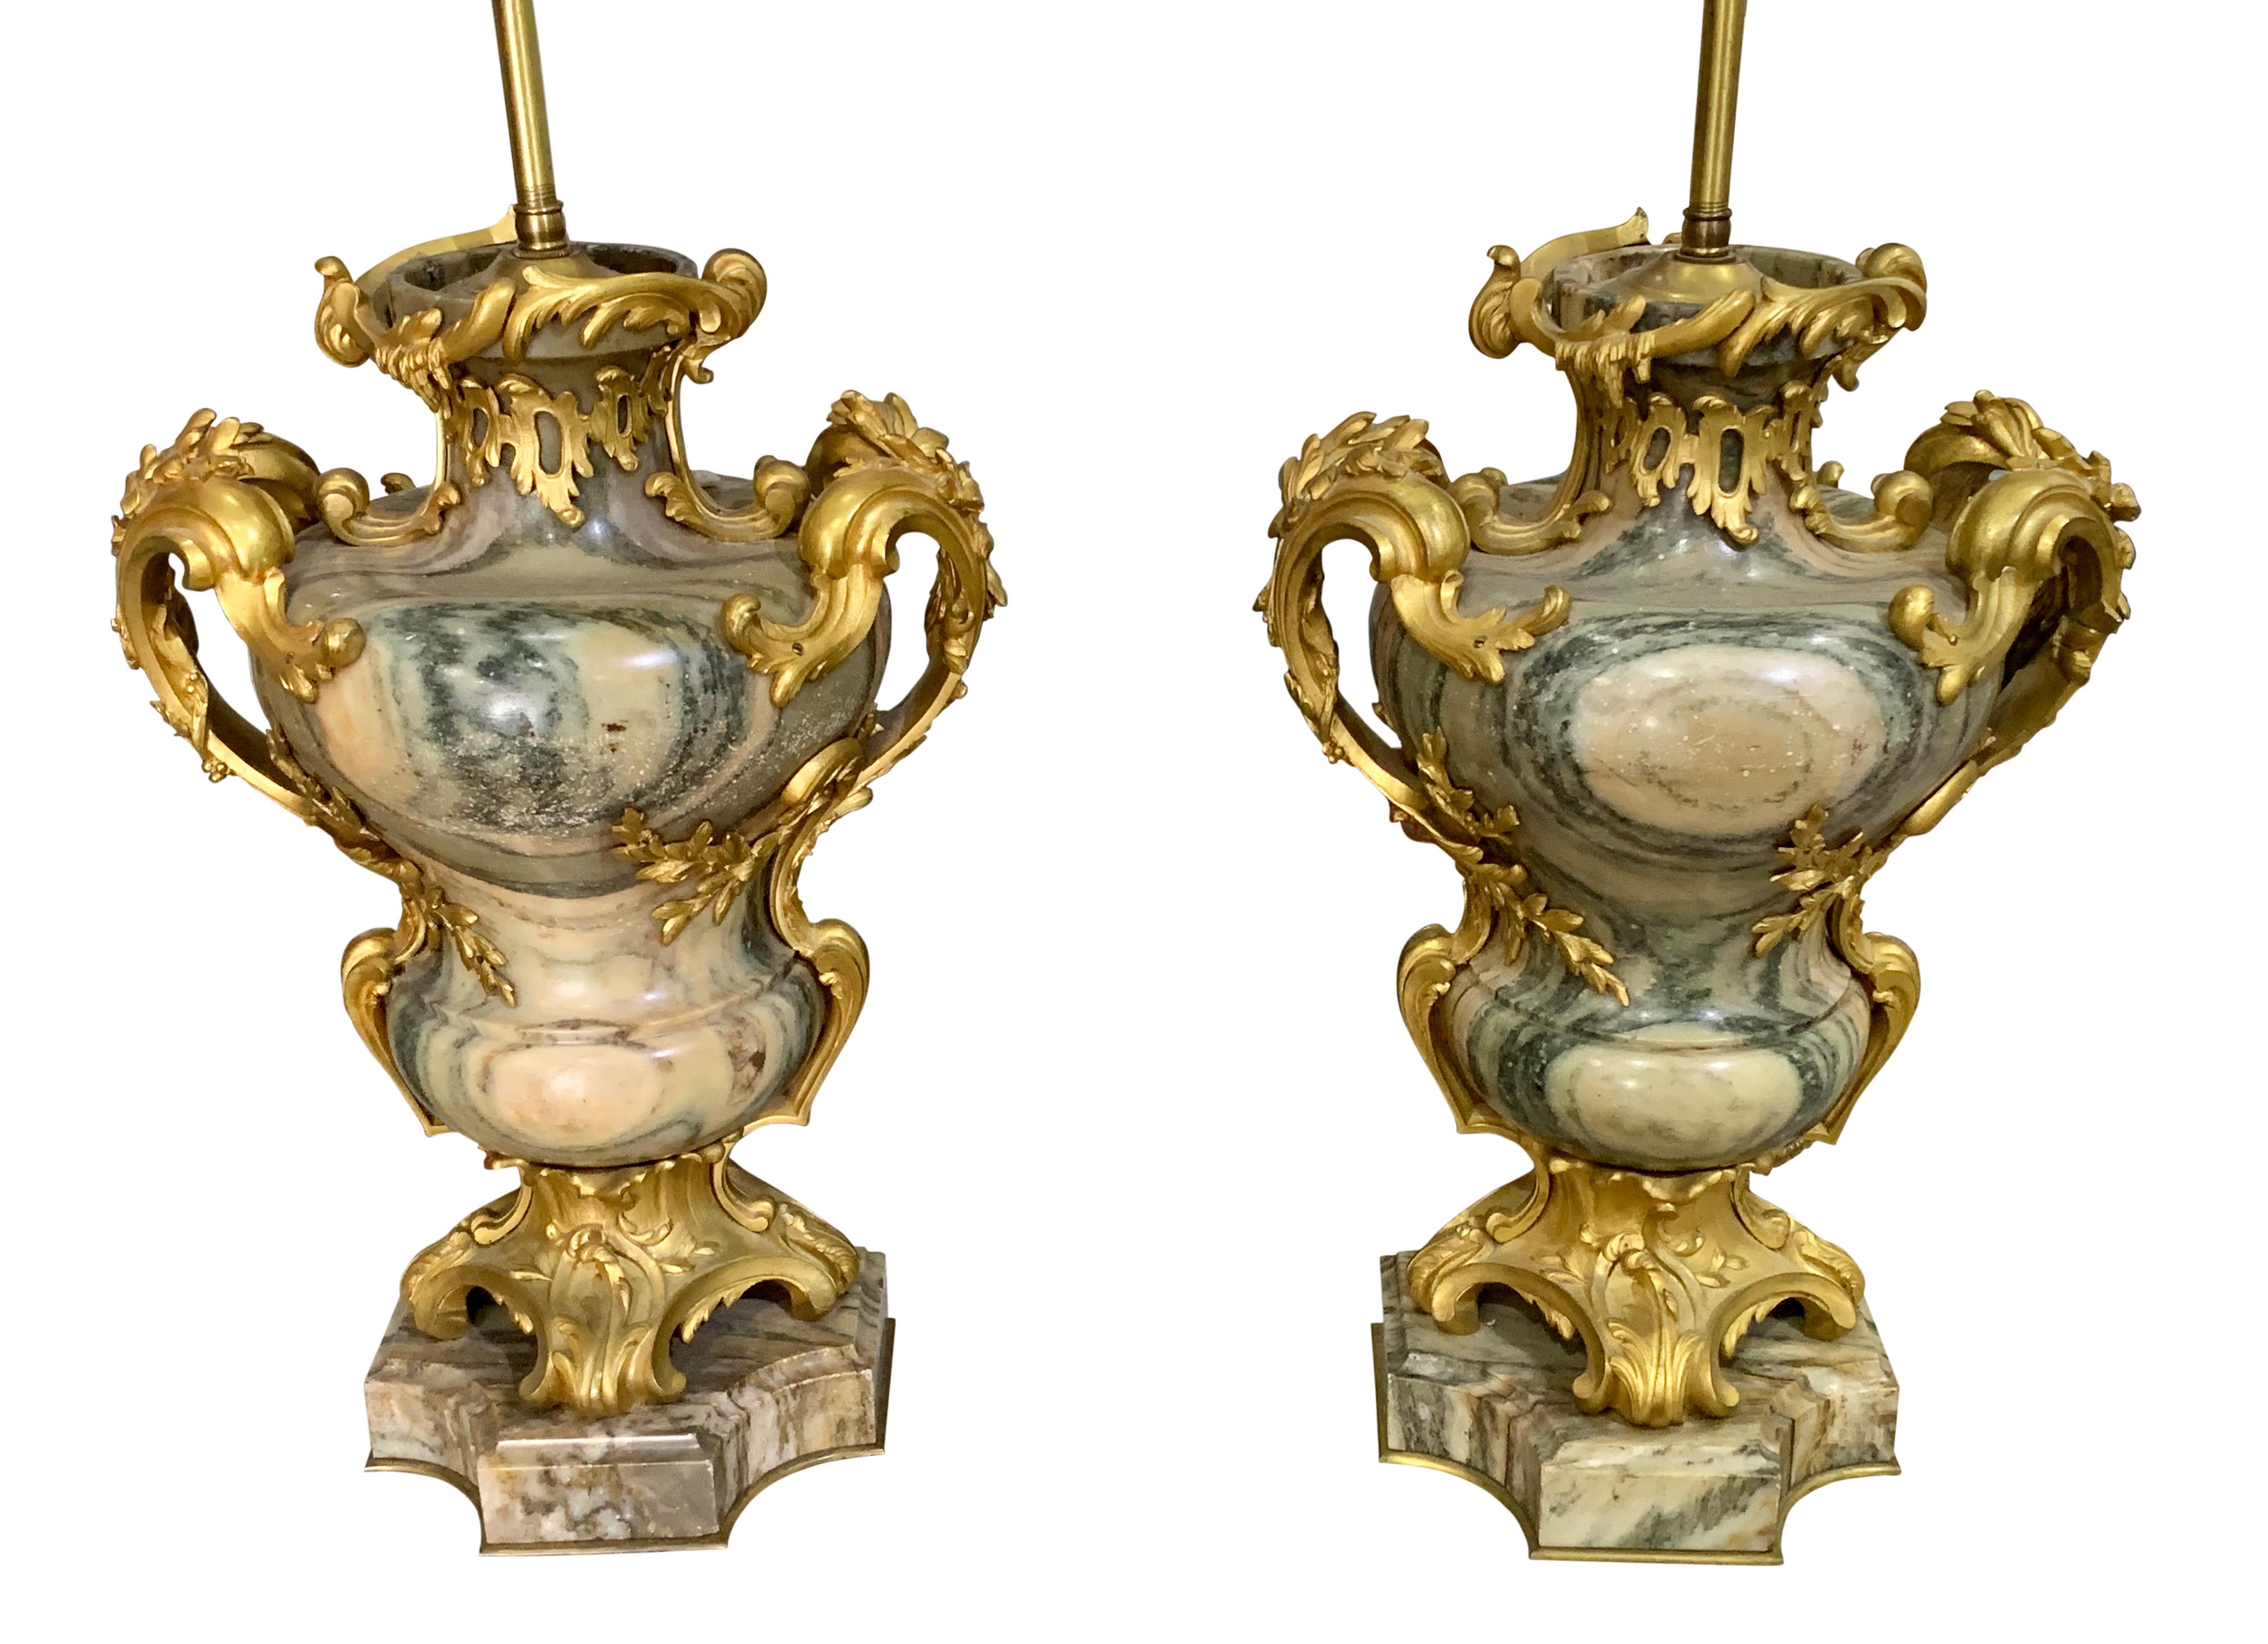 A lovely pair of 19th century French Louis XV style gilt-bronze mounted Cipollino marble urns masterfully made by Maison Millet, now mounted as lamps. Each Cipolin Antique de Grèce marble vase with twin foliate-cast handles, on a scrolled base and